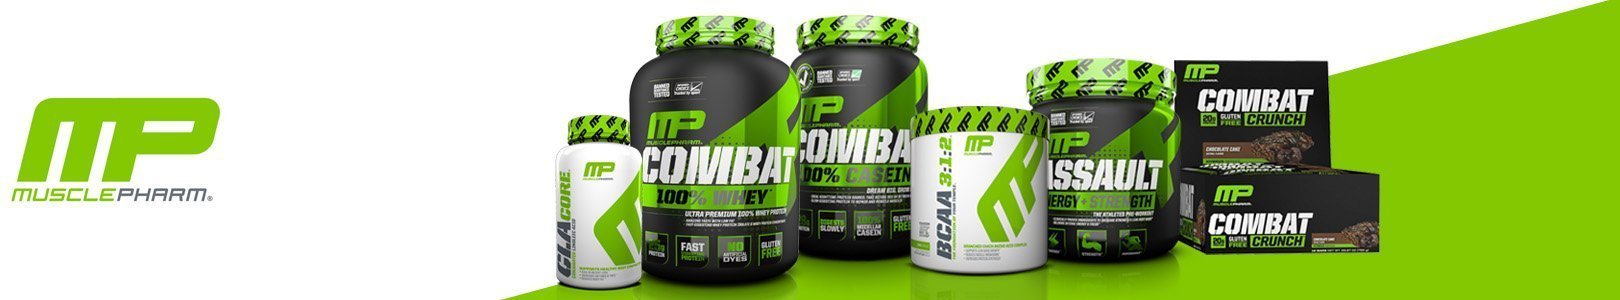 Musclepharm_Global Impex